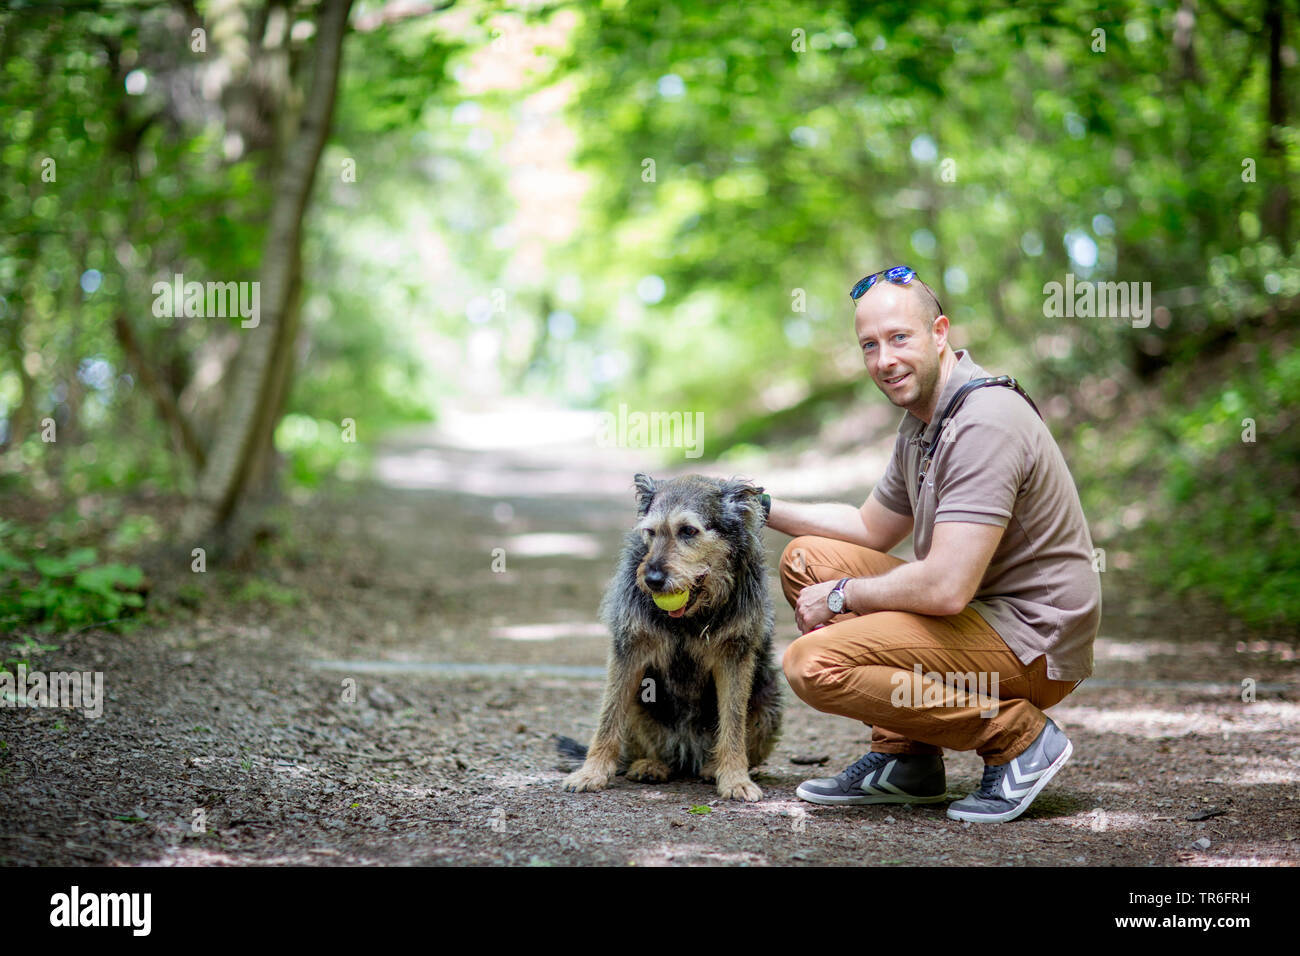 Berger de Picardie, Berger Picard (Canis lupus f. familiaris), with master on a forest path, Germany Stock Photo